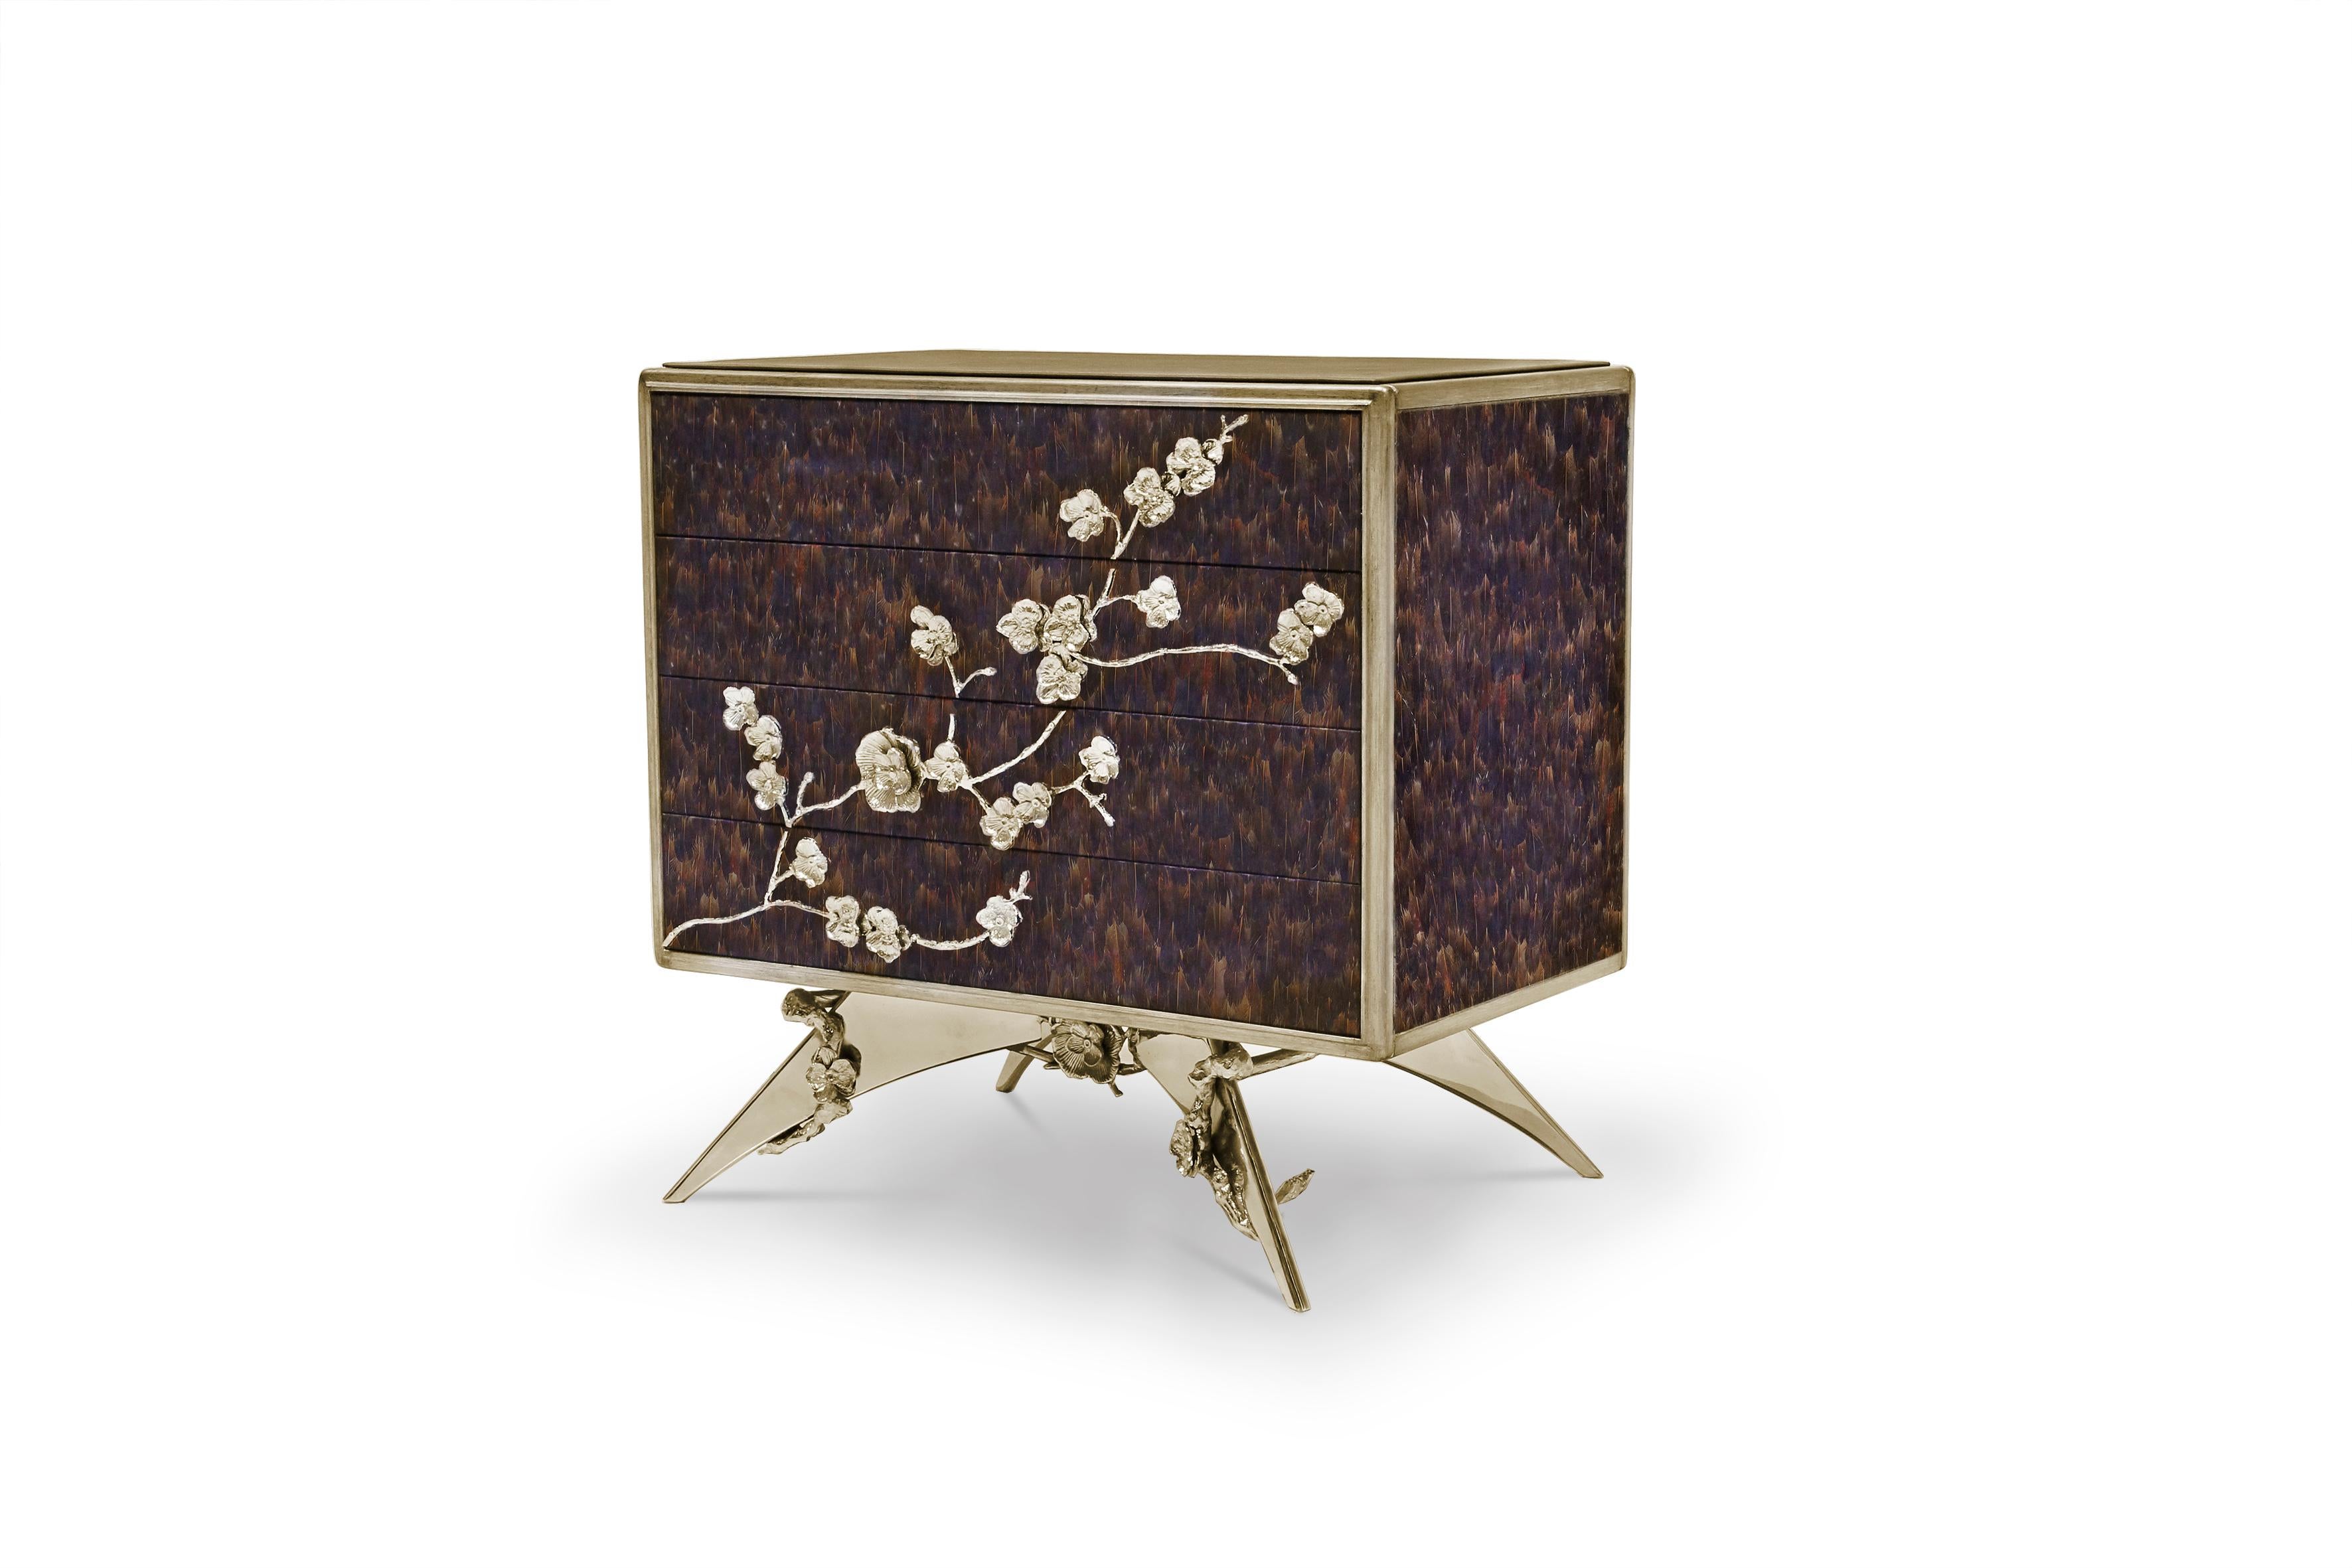 Art Deco Contemporary Spellbound Nightstand In High Gloss Lacquer and Adorns by Koket For Sale